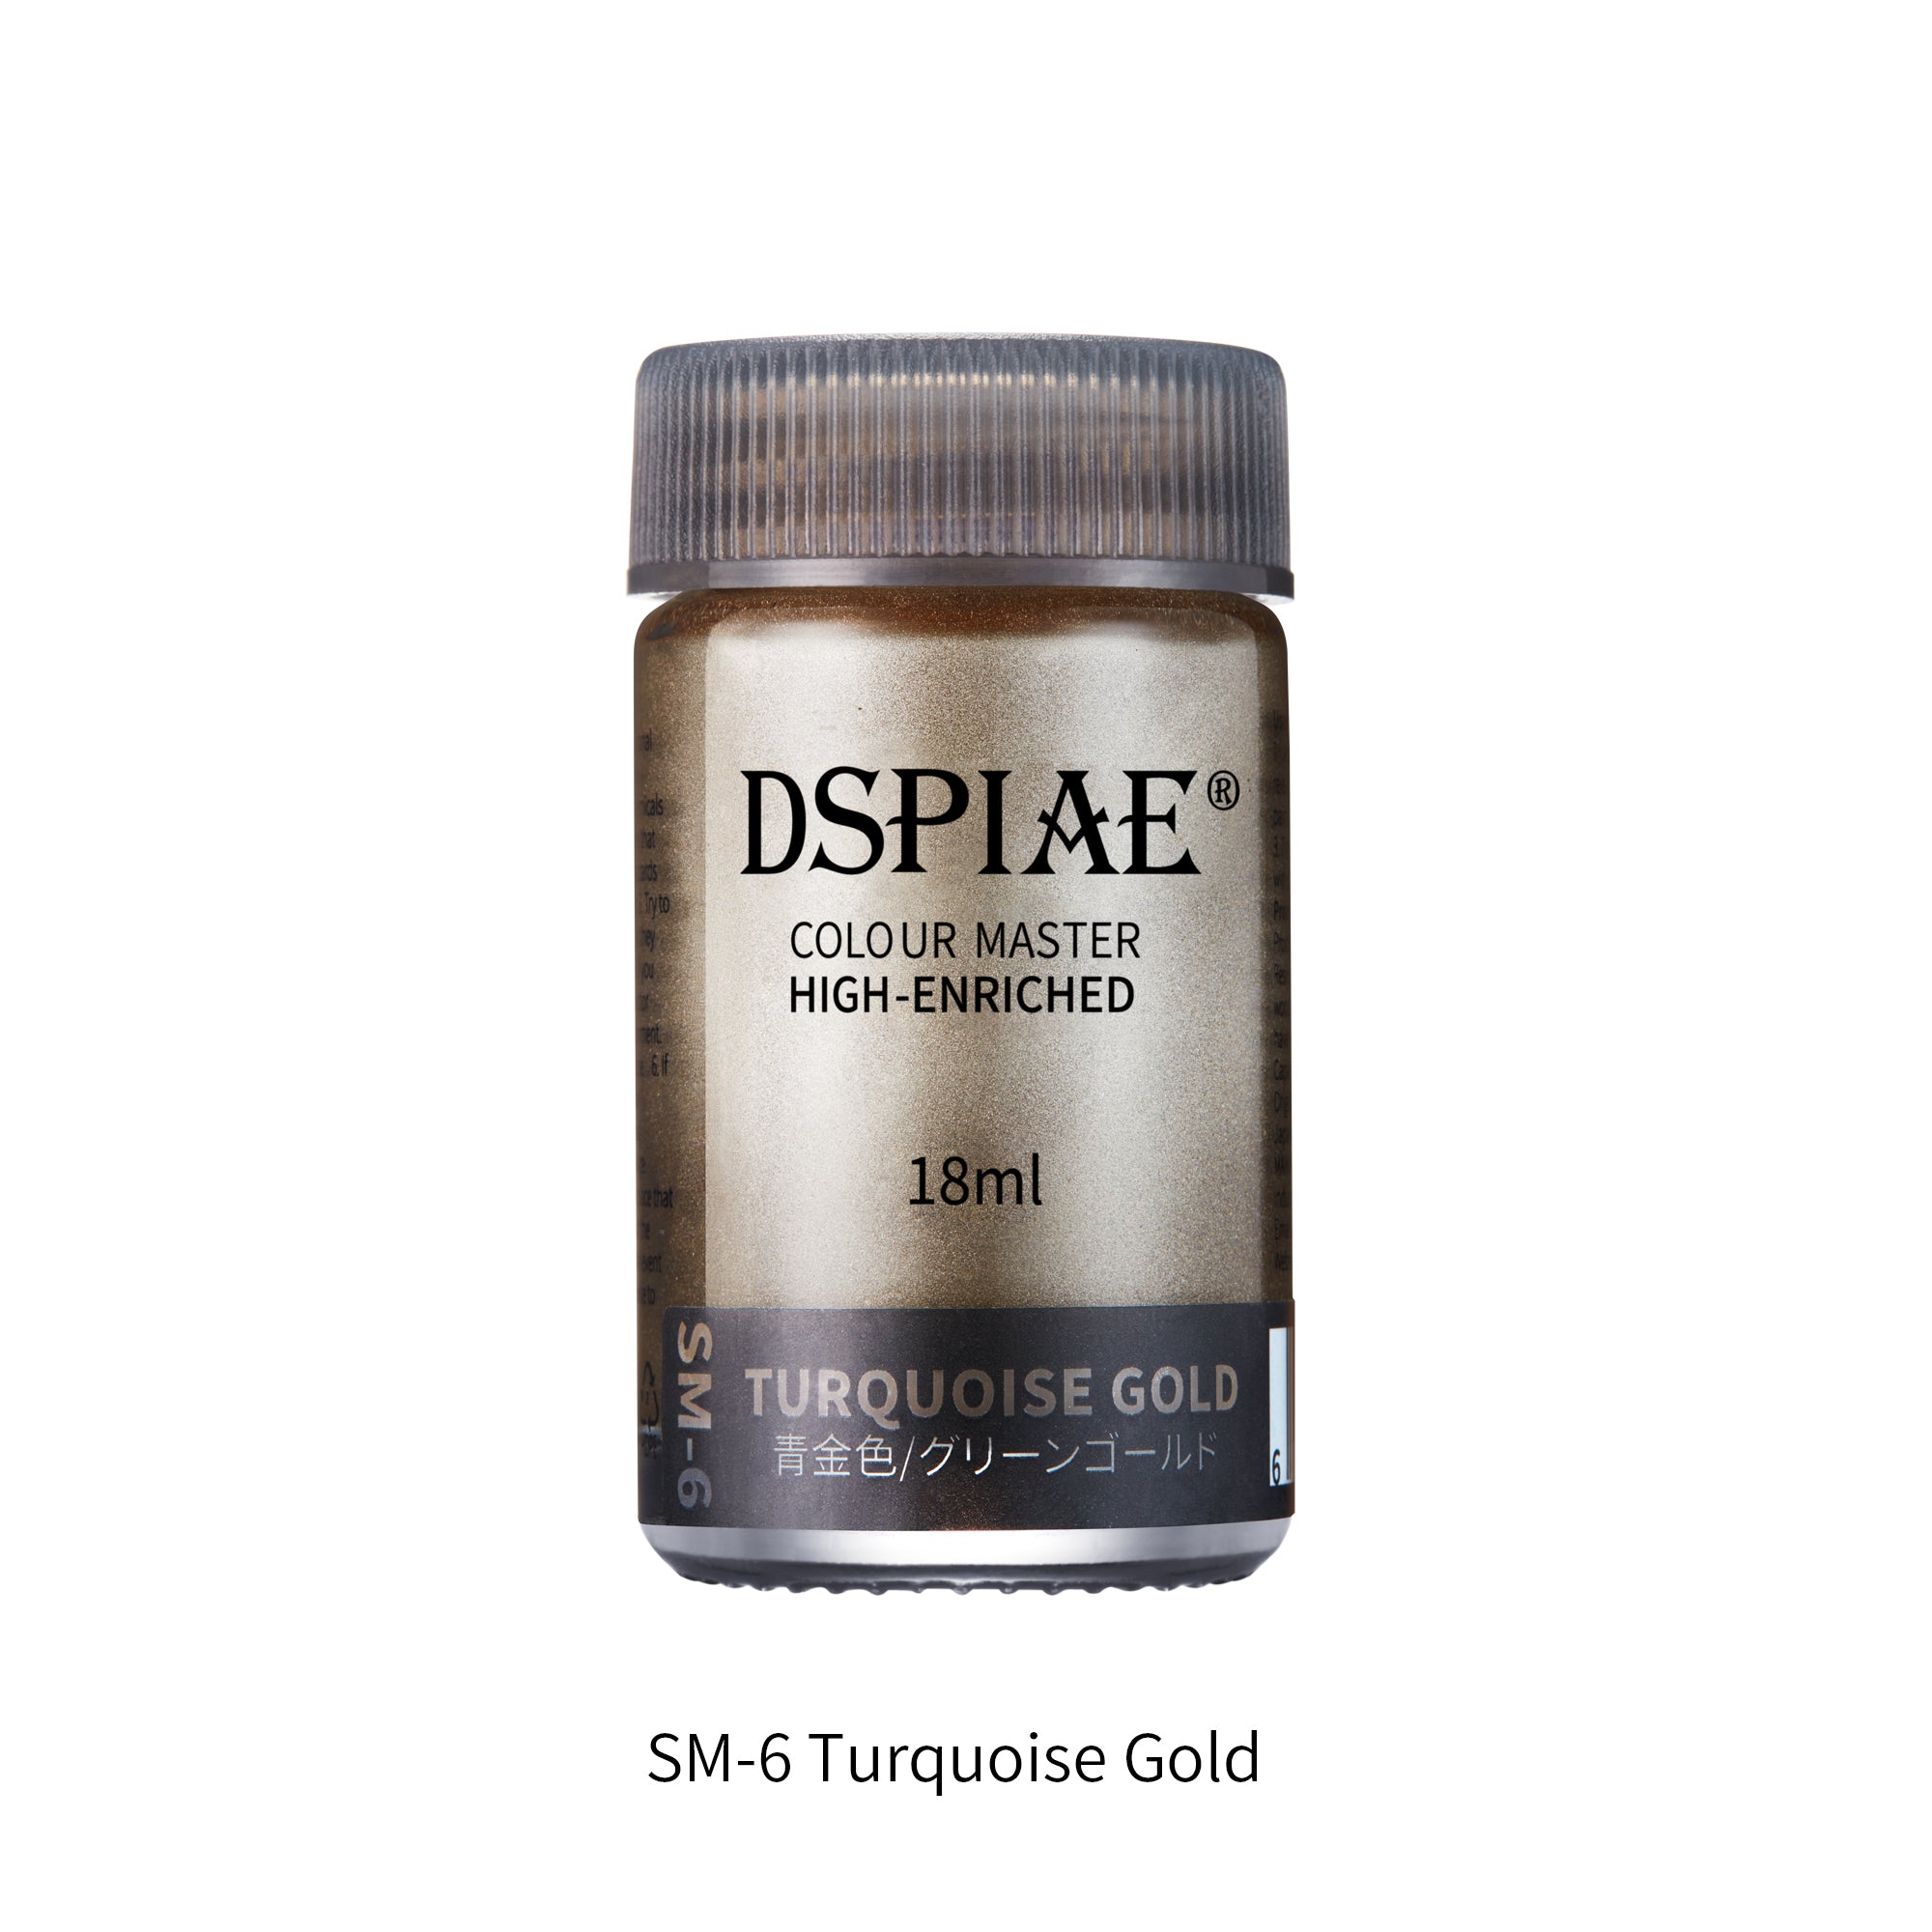 SM-6 Turquoise Gold 18ml